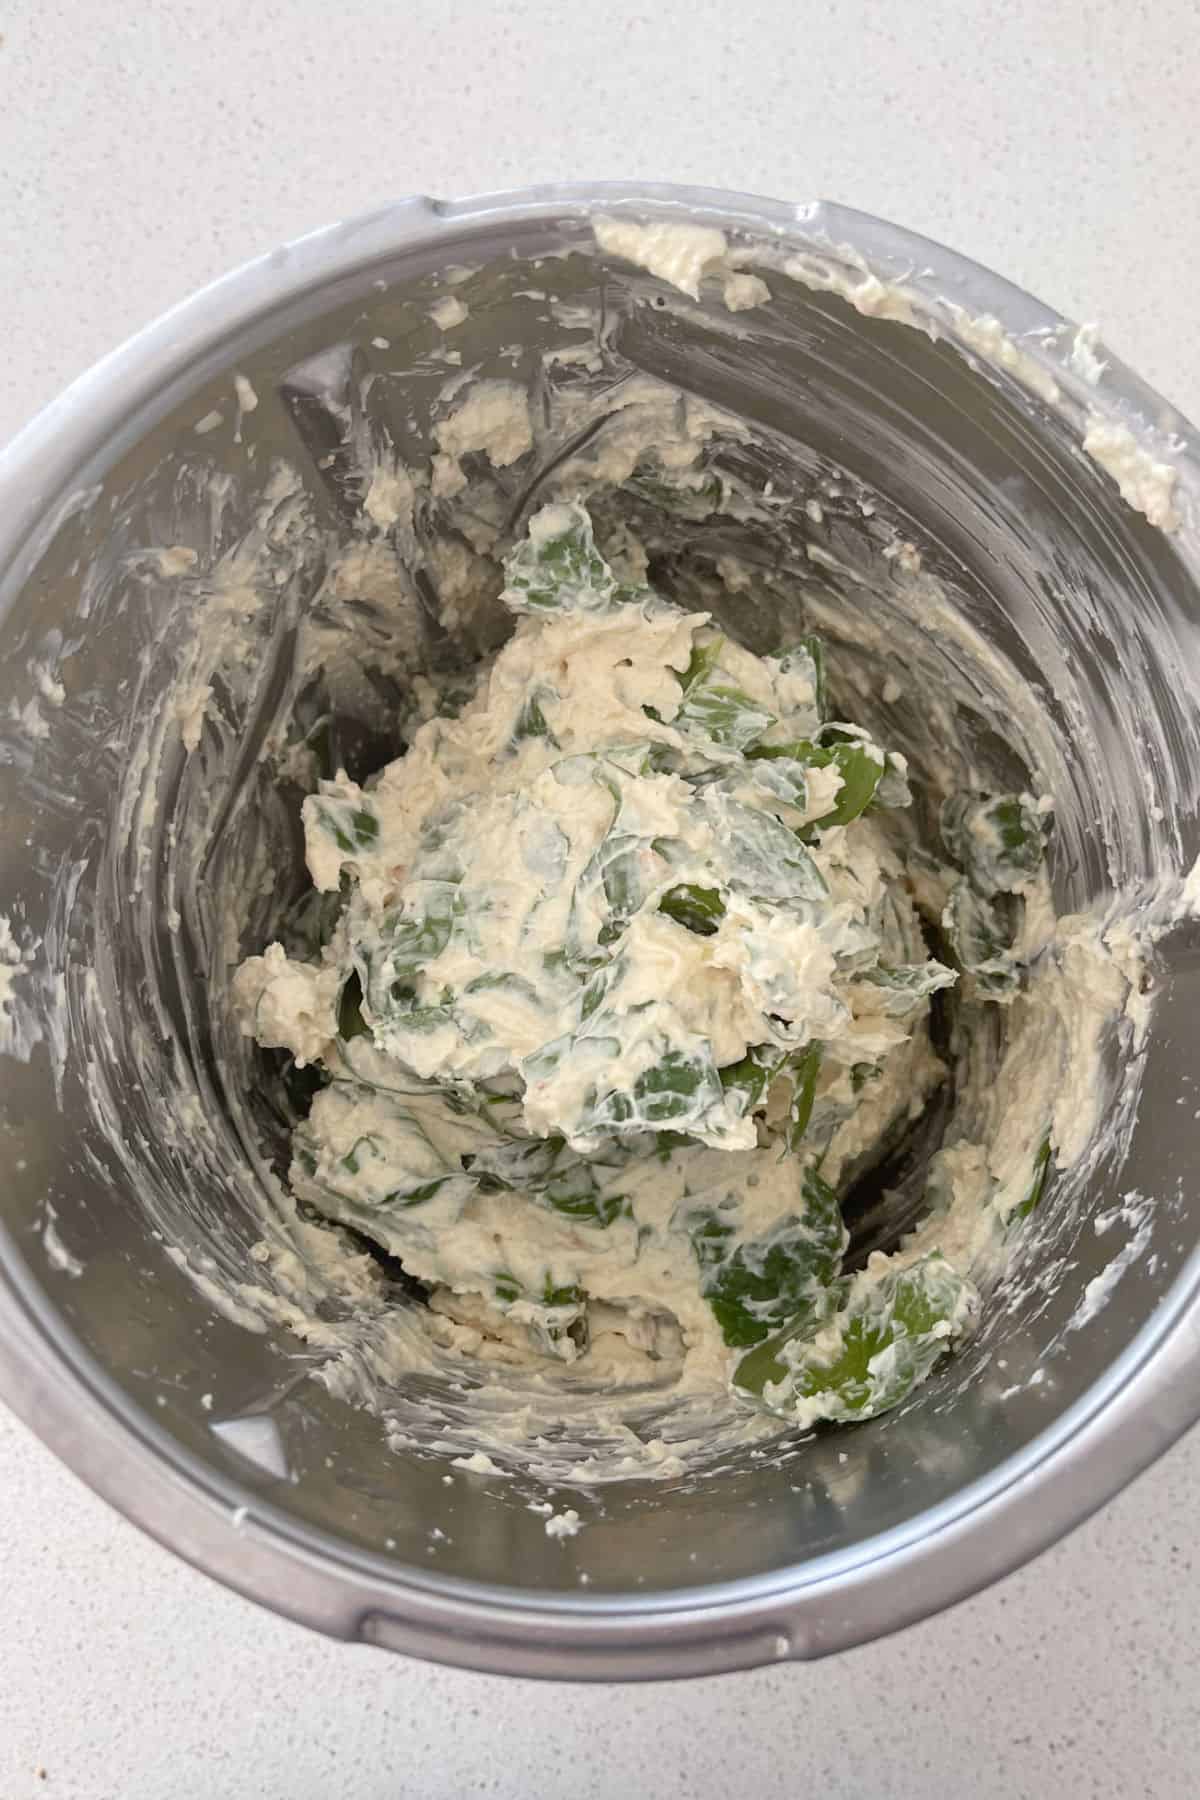 Spinach Dip ingredients combined in a thermomix bowl.